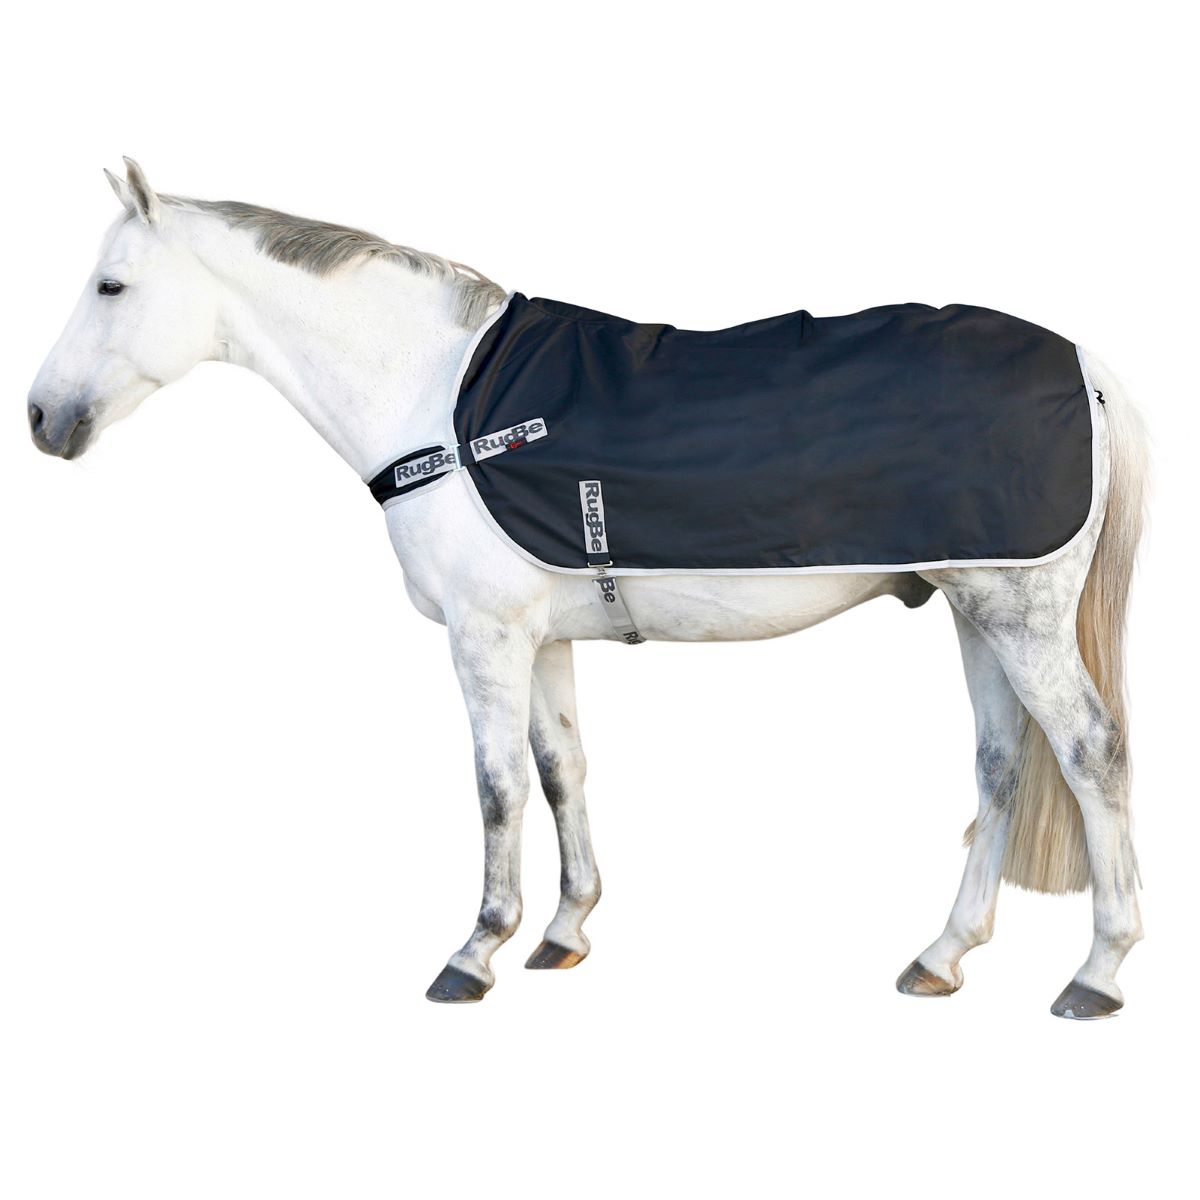 Covalliero RugBe Exercise Rug 600D